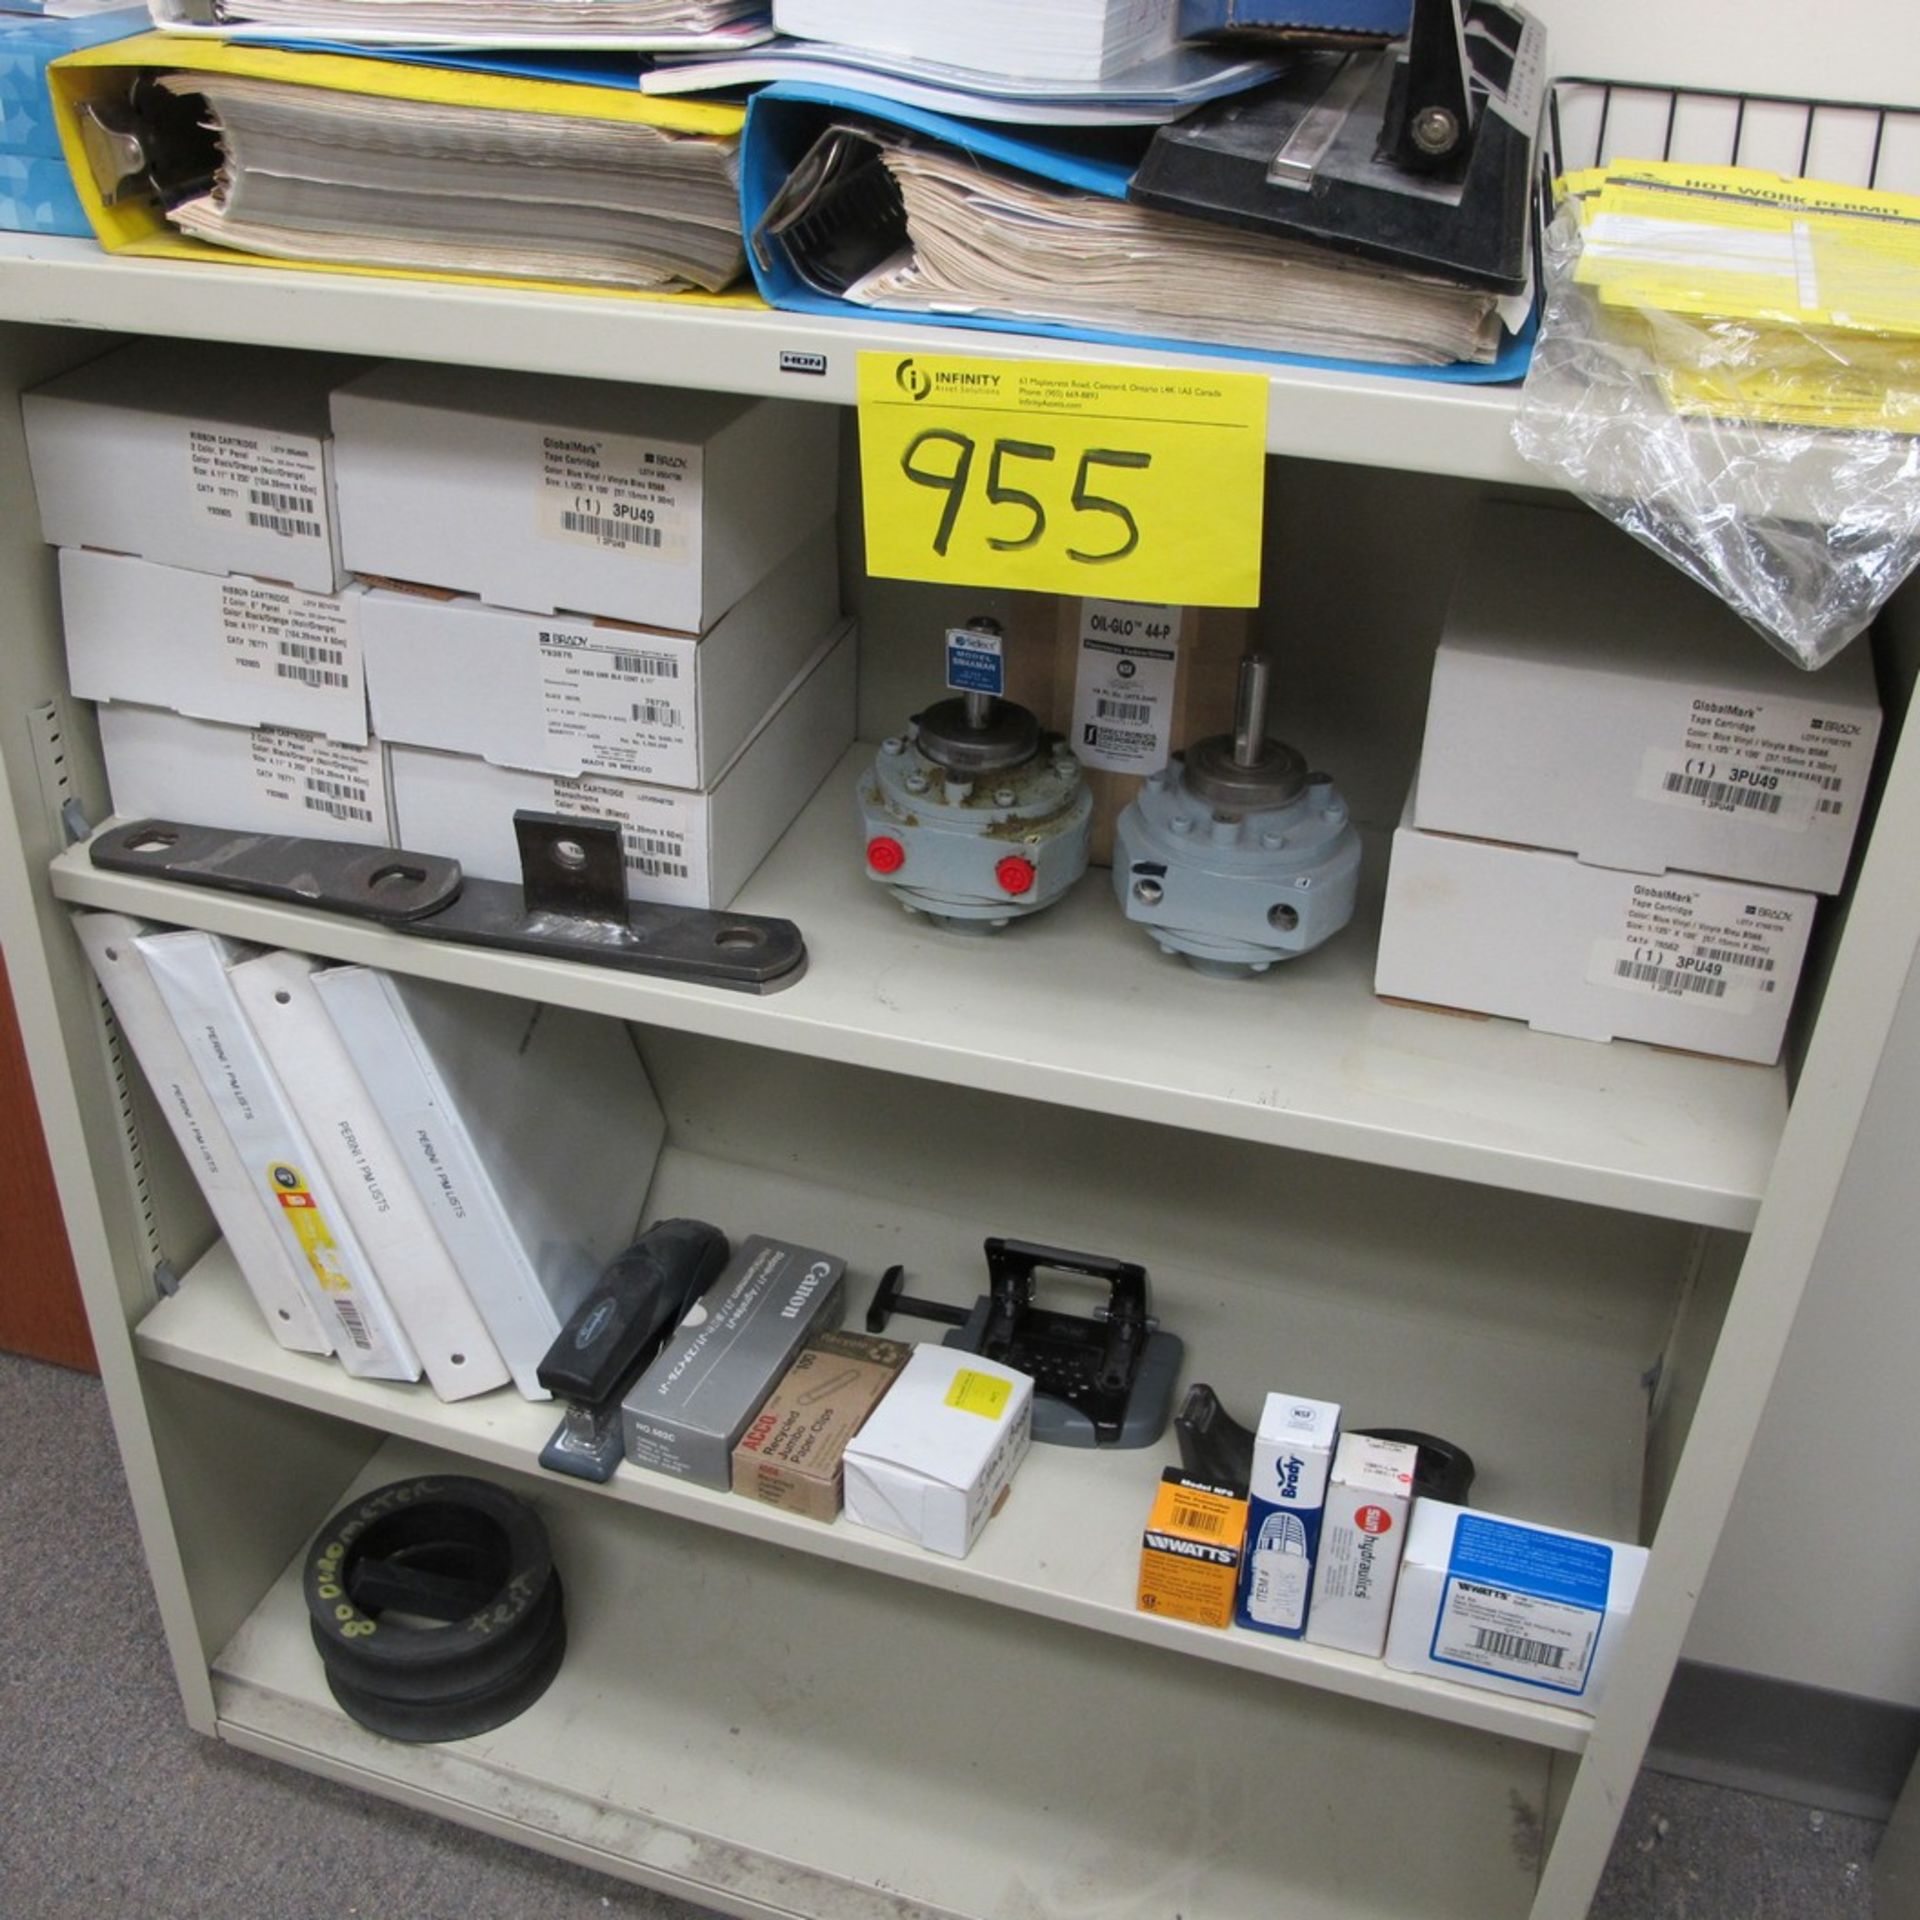 LOT OF (3) SHELVING UNITS/CABINETS W/ PARTS AS LABELLED AND SUPPLIES (2ND FLOOR NORTH OFFICES)